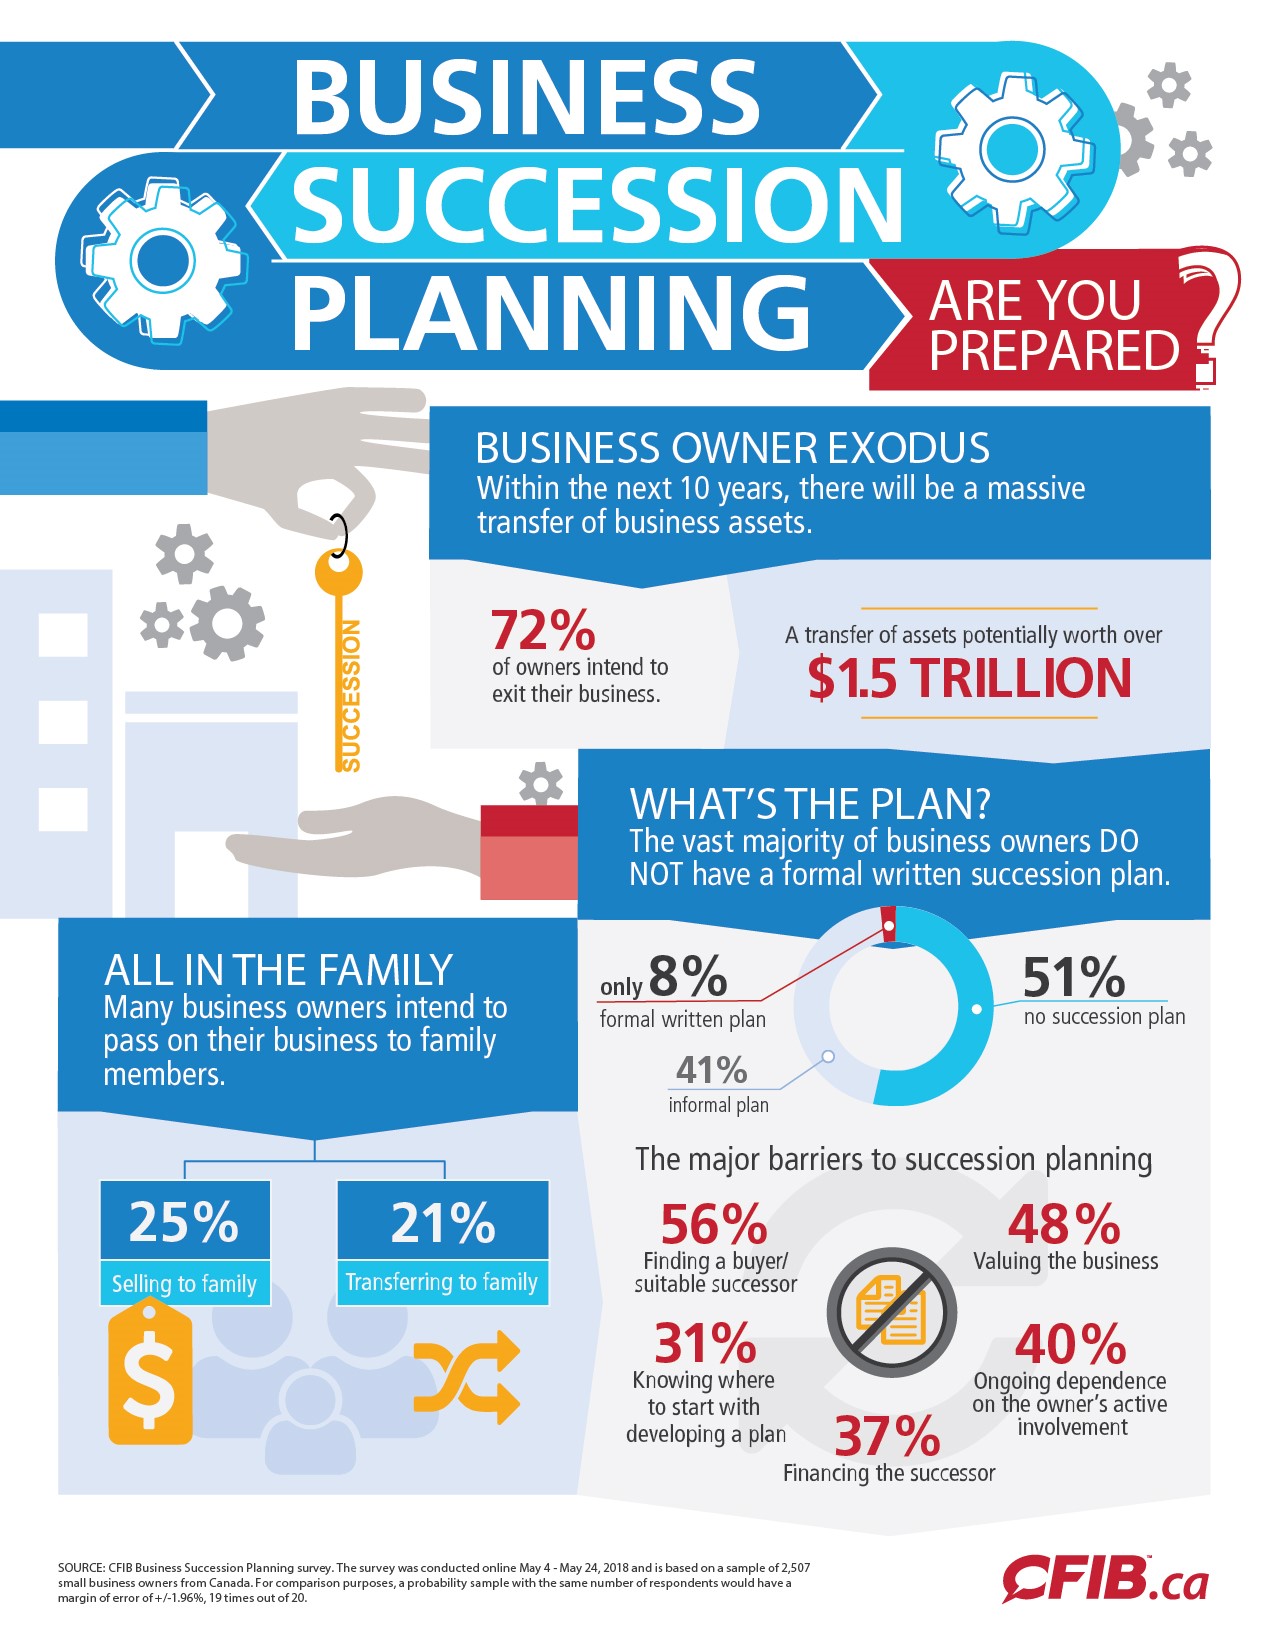 succession plan for small business